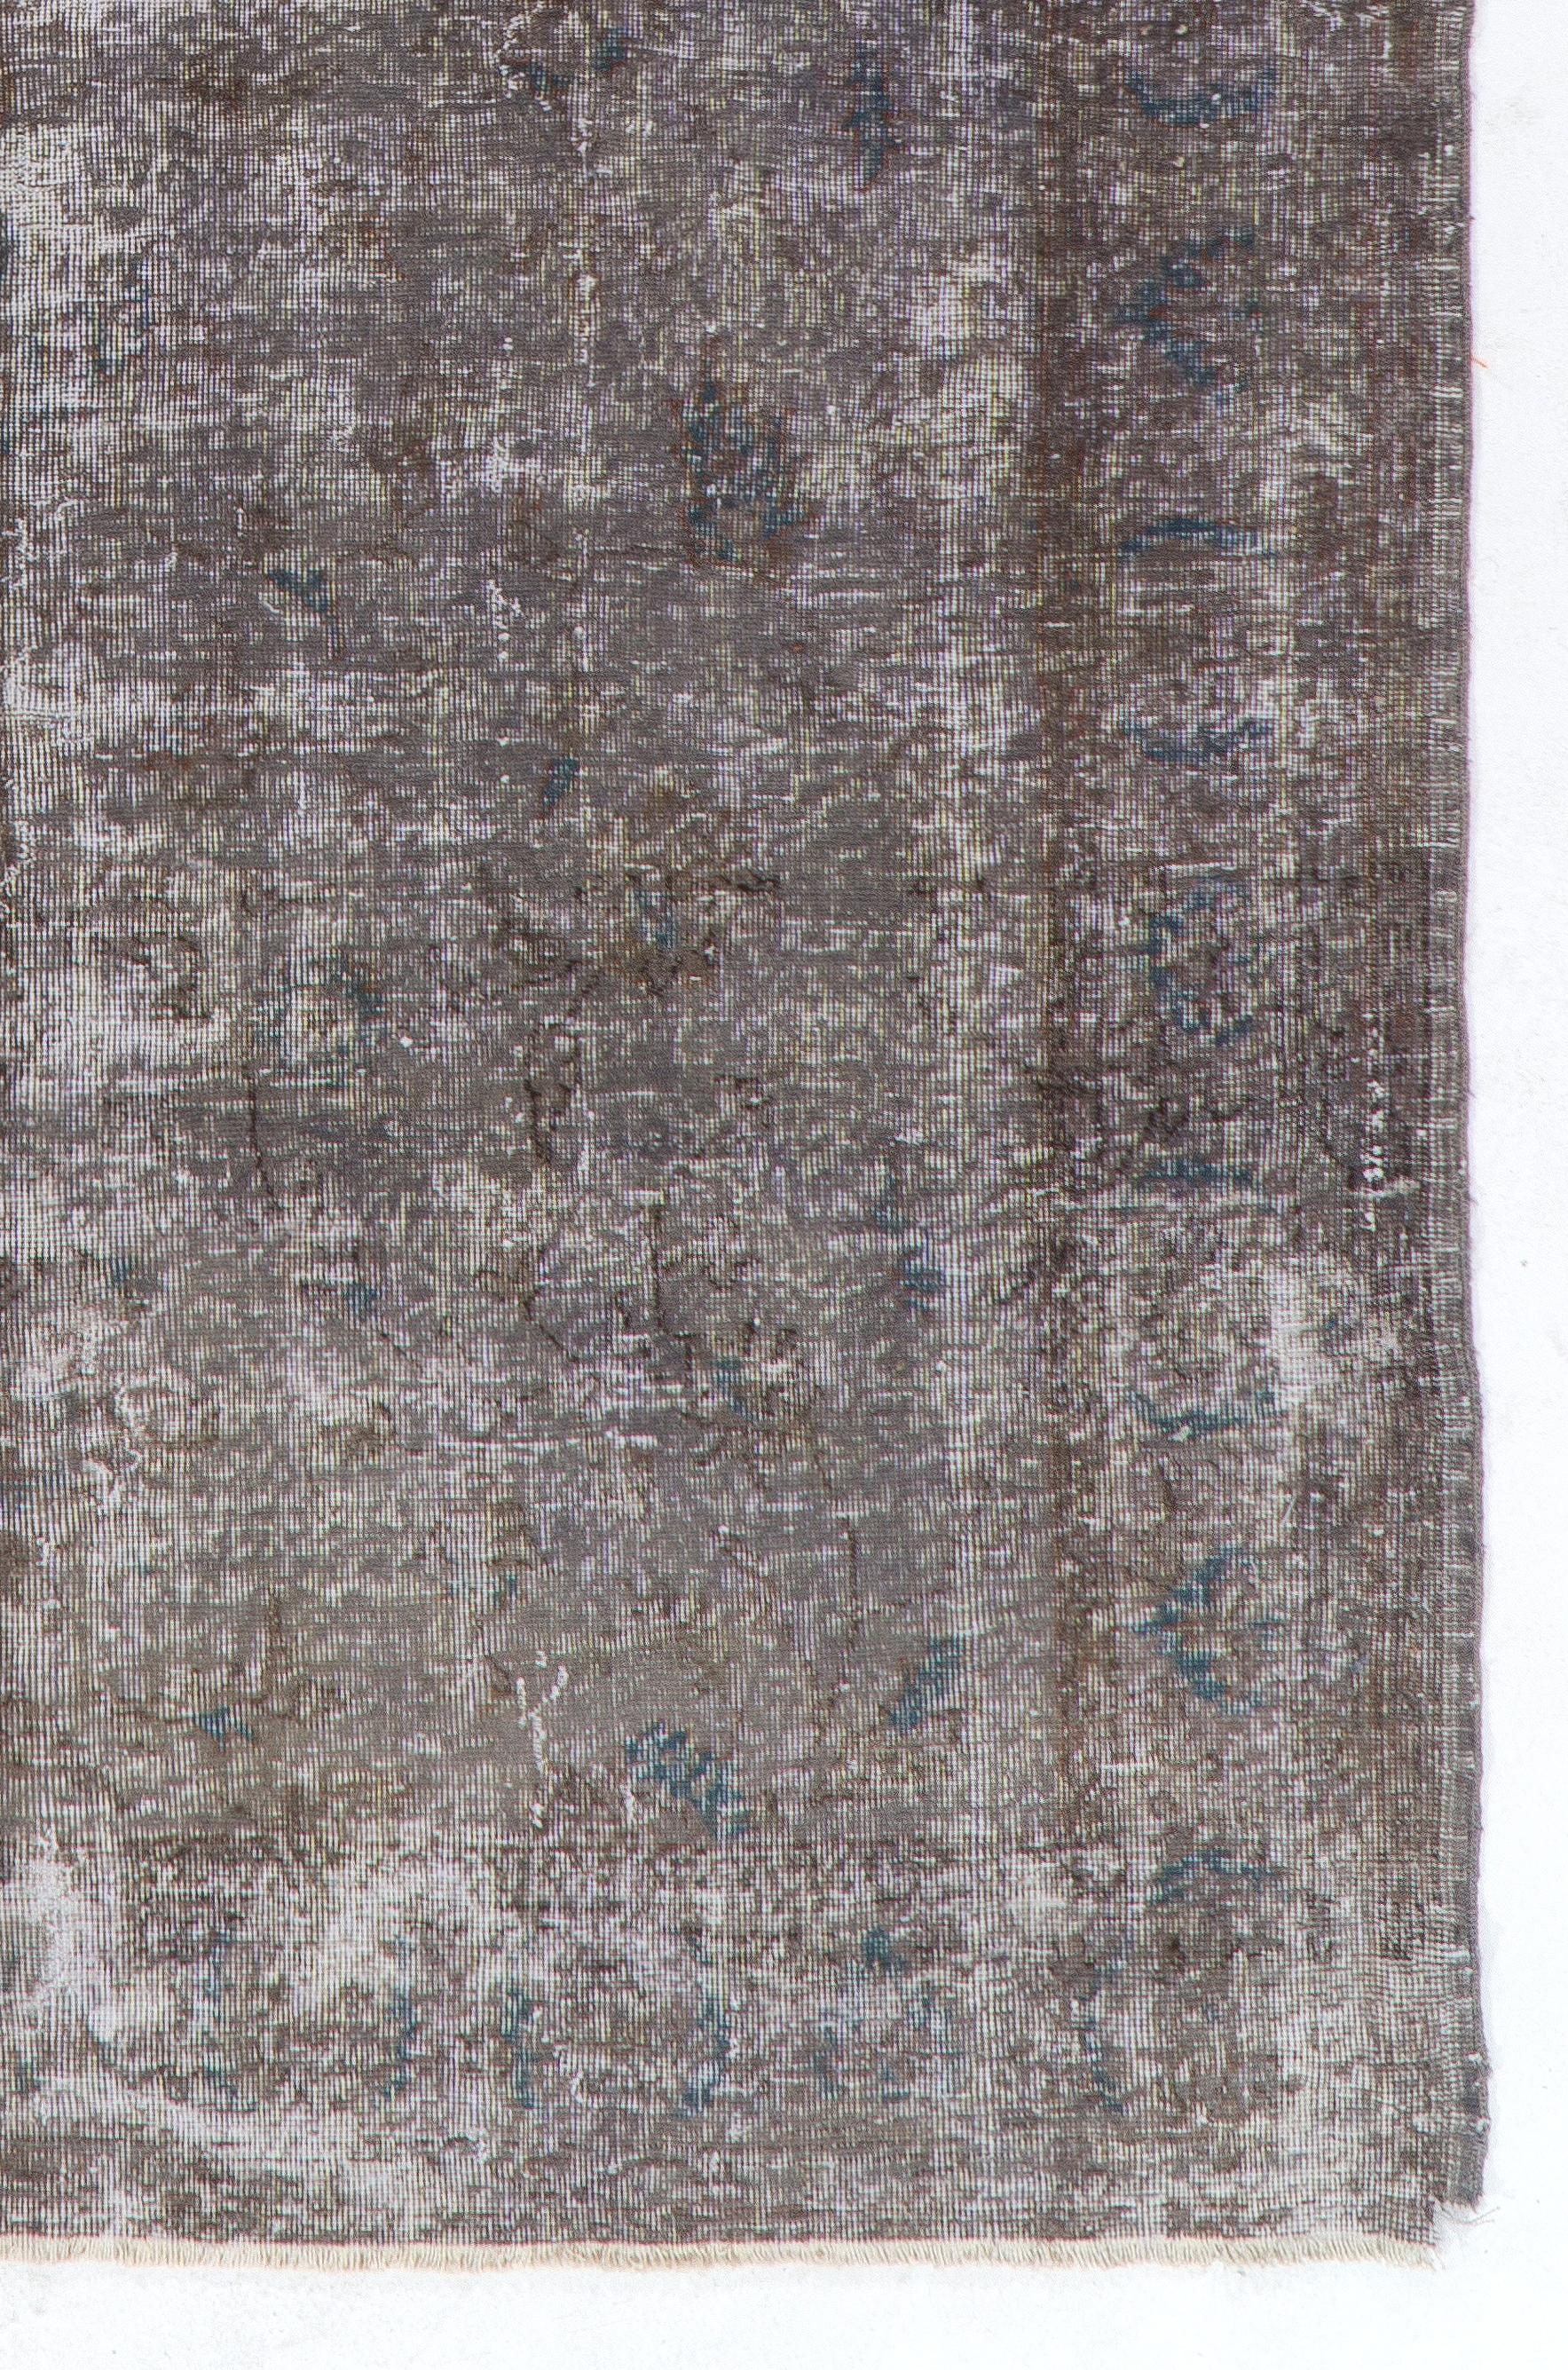 Hand-Knotted 6.4x10 Ft Distressed 1950s Turkish Wool Area Rug. Handmade Taupe Grey Carpet For Sale